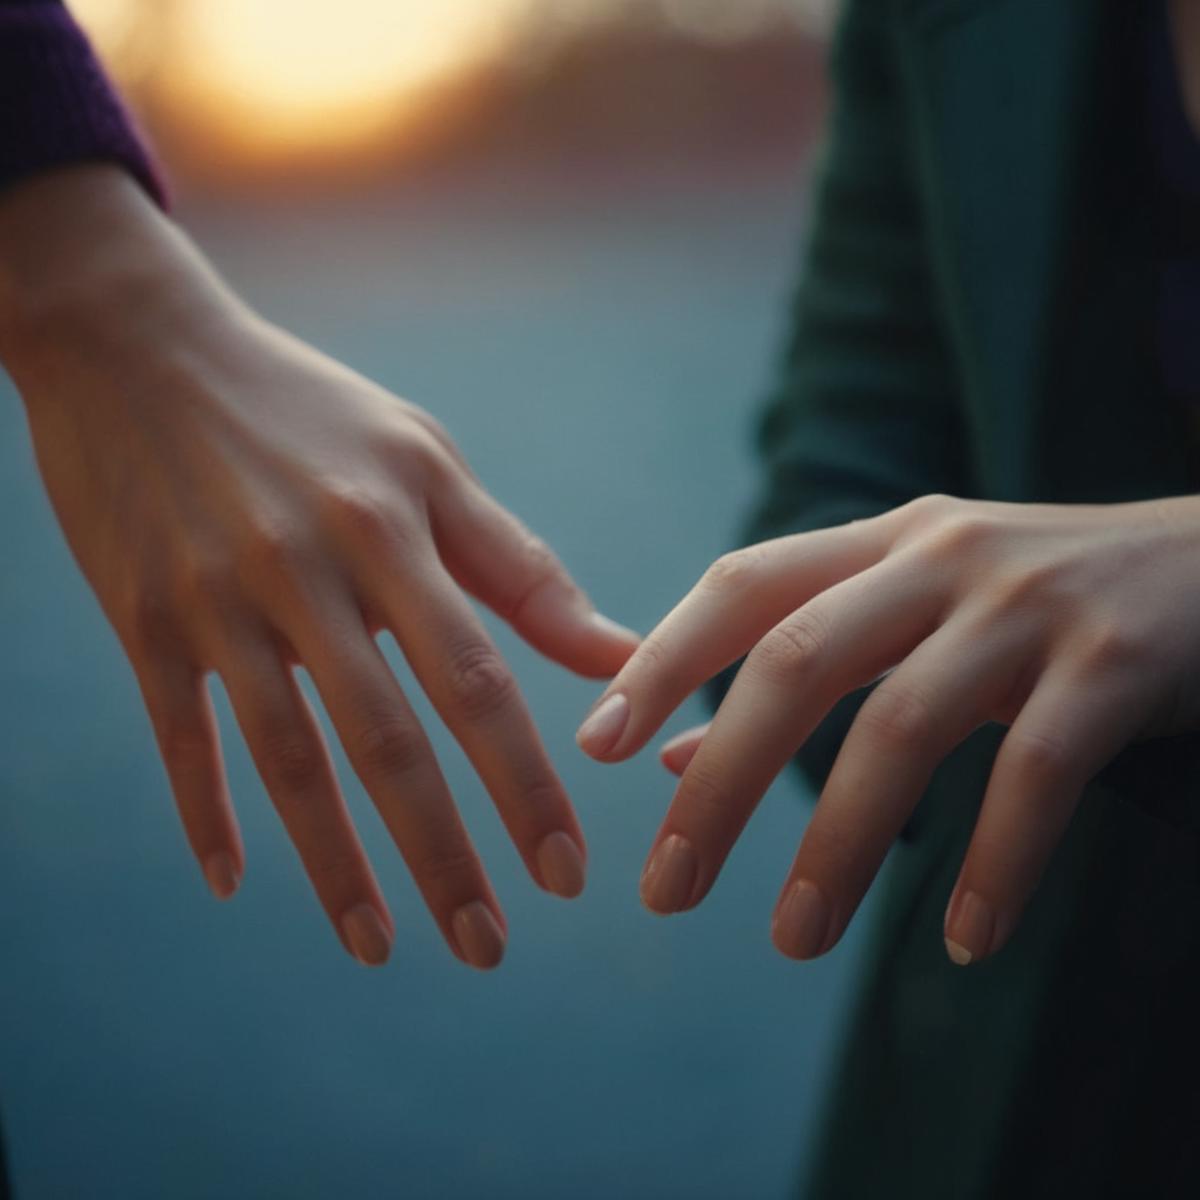 Two hands holding hands in front of a sunset.